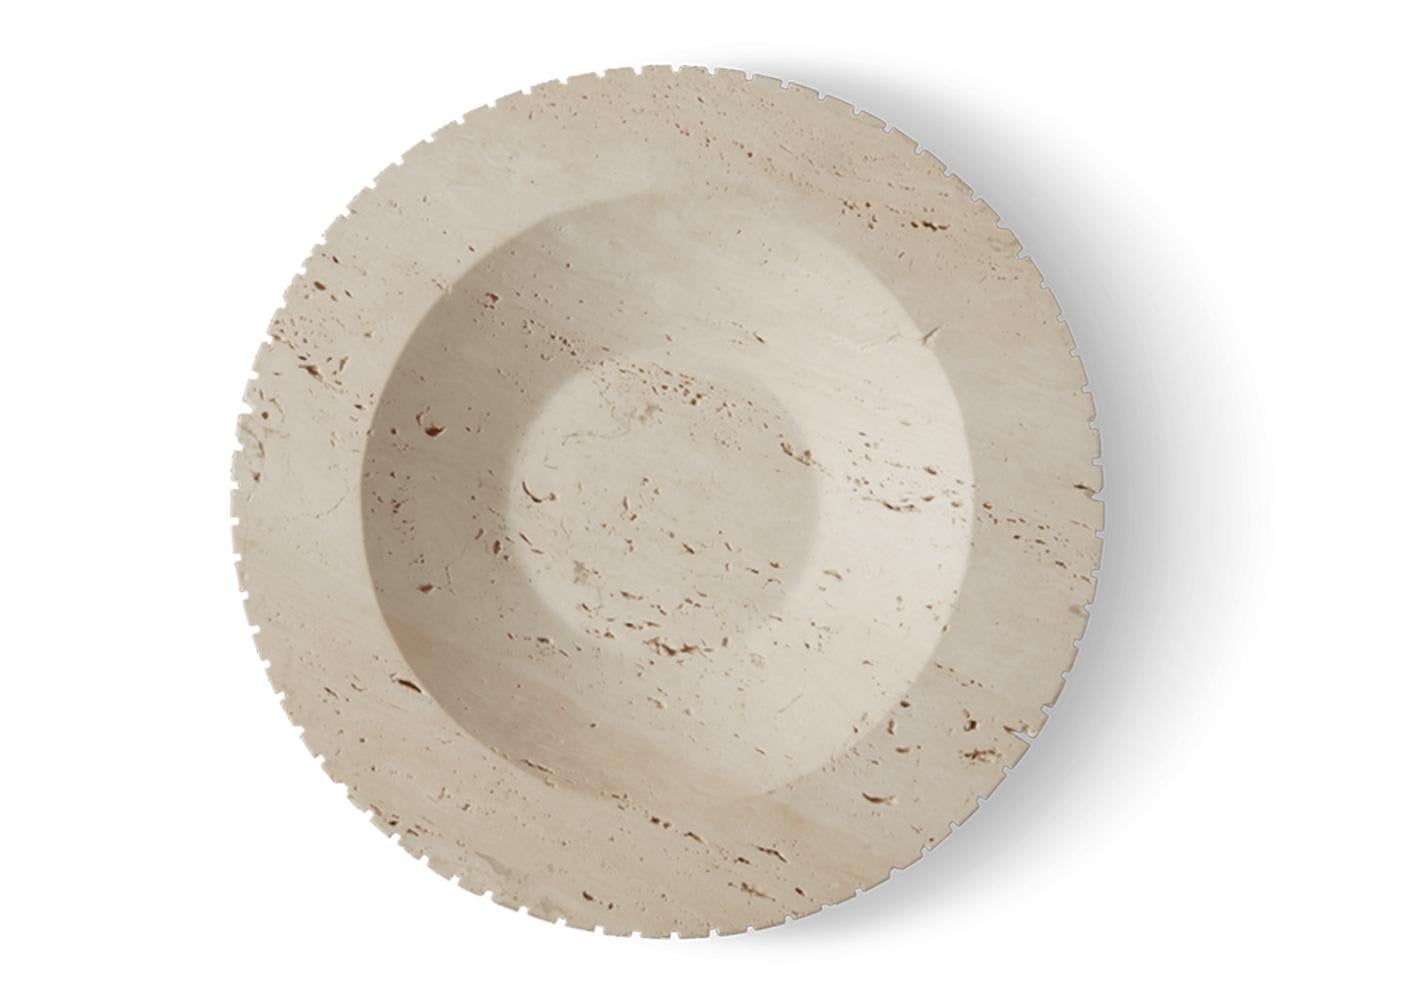 The Locus bowl is a modern design inspired by traditional stone carving techniques. A decorative bowl, elegantly proportioned and exceptionally crafted with grooves around the outer edge as a graphic expression of the stone carving process.
With